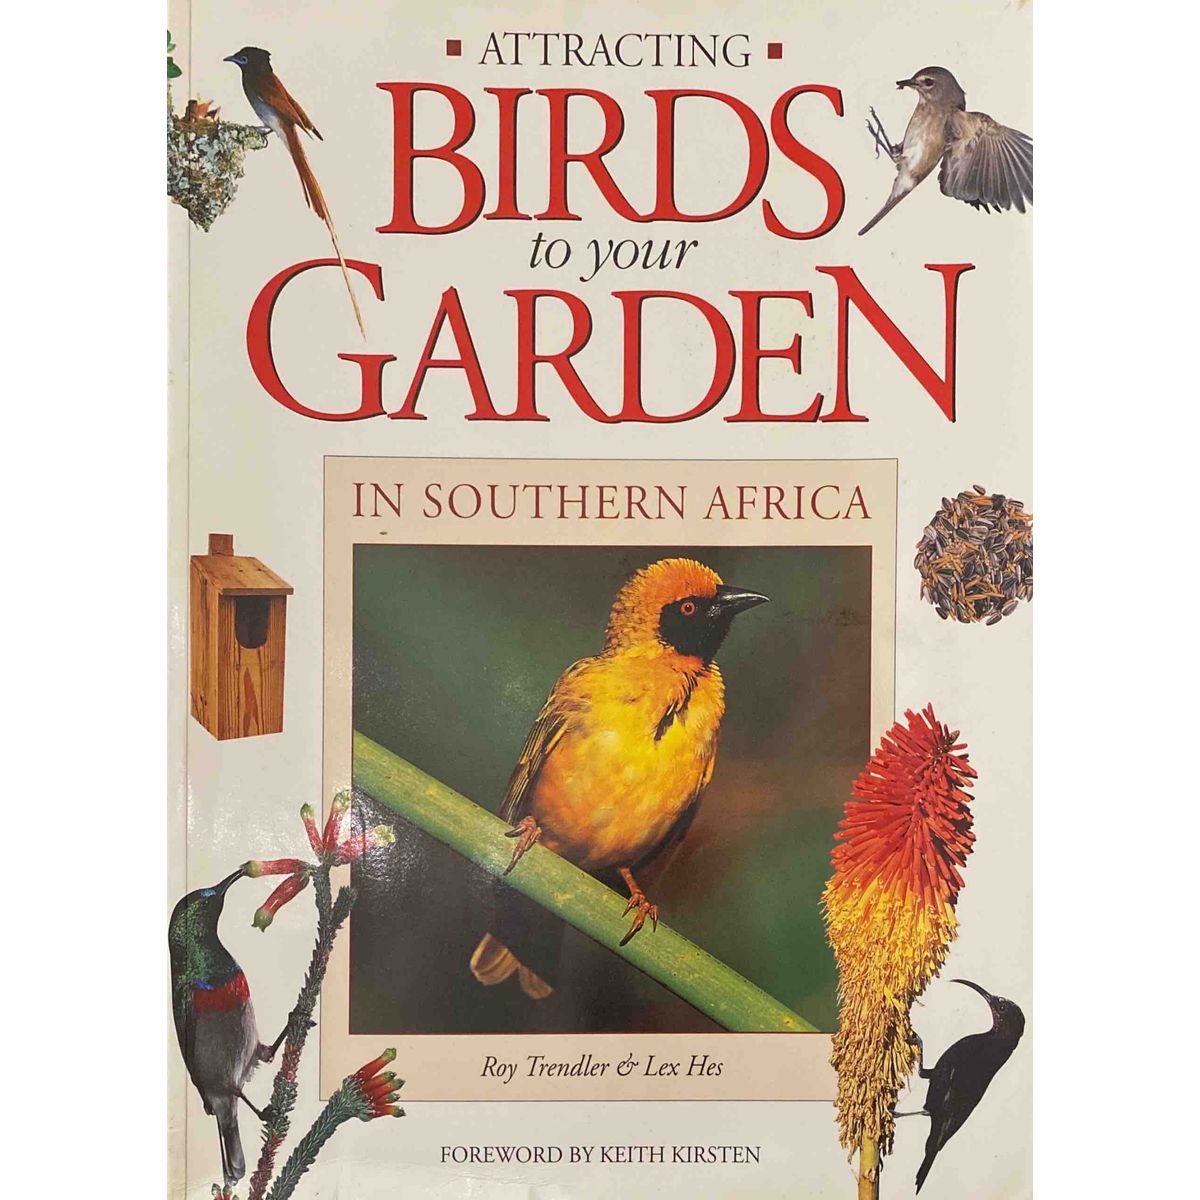 ISBN: 9781868724505 / 1868724506 - Attracting Birds to Your Garden in Southern Africa by Roy Trendler & Alex Hes [2000]